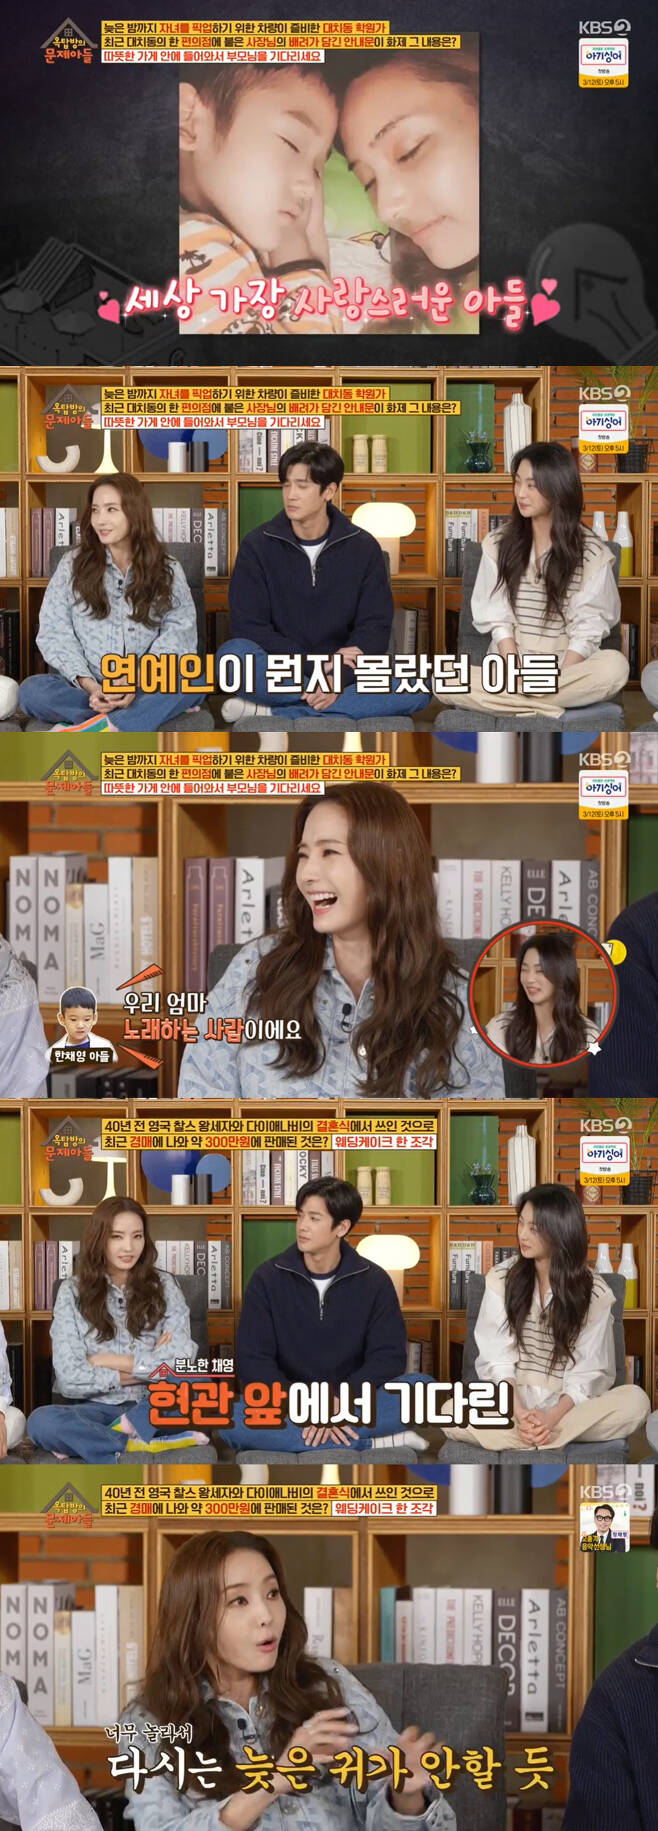 Actor Han Chae-young has revealed his family love.Han Chae-young, Koo Ja-sung, and Ji-soo appeared on KBS2 Problem Child in House broadcast on the 1st.Han Chae-young recently mentioned his unusual diet, saying he weighed up to 58kg: Managers and two people order 12 servings of meat to eat, I eat more.I dont manage my body by food control. In high school, I ate a pizza large plate, two or three hamburgers, and two ramen noodles.I think Im less weighted than others. When you eat, you eat and manage freely. You keep exercising, he said.After the weight gained, he also told me about an episode that he would never forget: I broadcast with the manager, but I sat down in the drawer because I was struggling with the exercise scene, and it sat down.Complaine came in from the brand, he laughed.Han Chae-young is still in his prime and unchanging beauty even though he is 40 The Cost.So I am constantly listening to the modifier of Barbie dolls. It is not 20 The Cost now, but it feels so good to call it now.It seems good to hear that it is beautiful regardless of age. It is good every time I listen. He also brought up a story about marriage life: My husband is an unwaveringly relaxed person, like Friend, always saying best living in a house as a prank.He also told me about his marriage fight. My husband promised to come home by 12 oclock in the night, but he kept his promise and one day it was 12:30, but he did not come in.I waited in front of the front door with anger and when I came in, I screamed, Why did you come so late?Han Chae-young said, I think it is good to be comfortable when I live for a long time. My husband understands my nightly shooting.When I talked about my 10-year-old son, my eyes were brighter: My son didnt know much about my job until he was seven, he didnt bother telling me.But one day I went to kindergarten and asked, Friends are moms and entertainers. What is entertainers?I was in the Slam Dunk of My Sisters and when I saw him singing, he said, My mother is a singer. He smiled.When I call, I tell you, I love you, and if I can not get a call, I leave a voice message. 